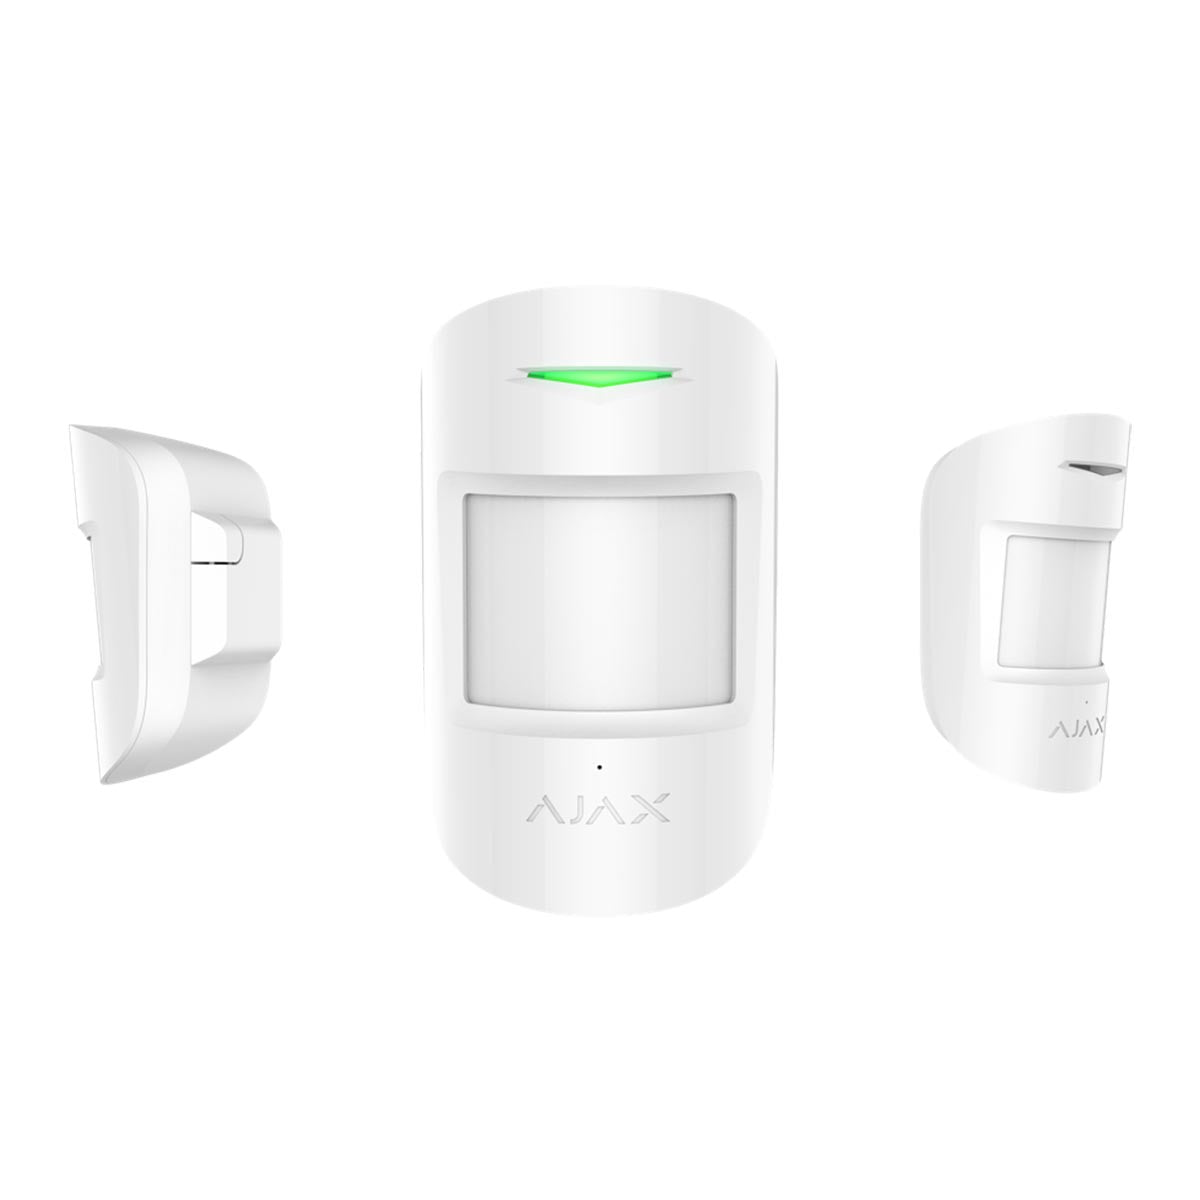 Ajax CombiProtect White 3-Way View BD422W